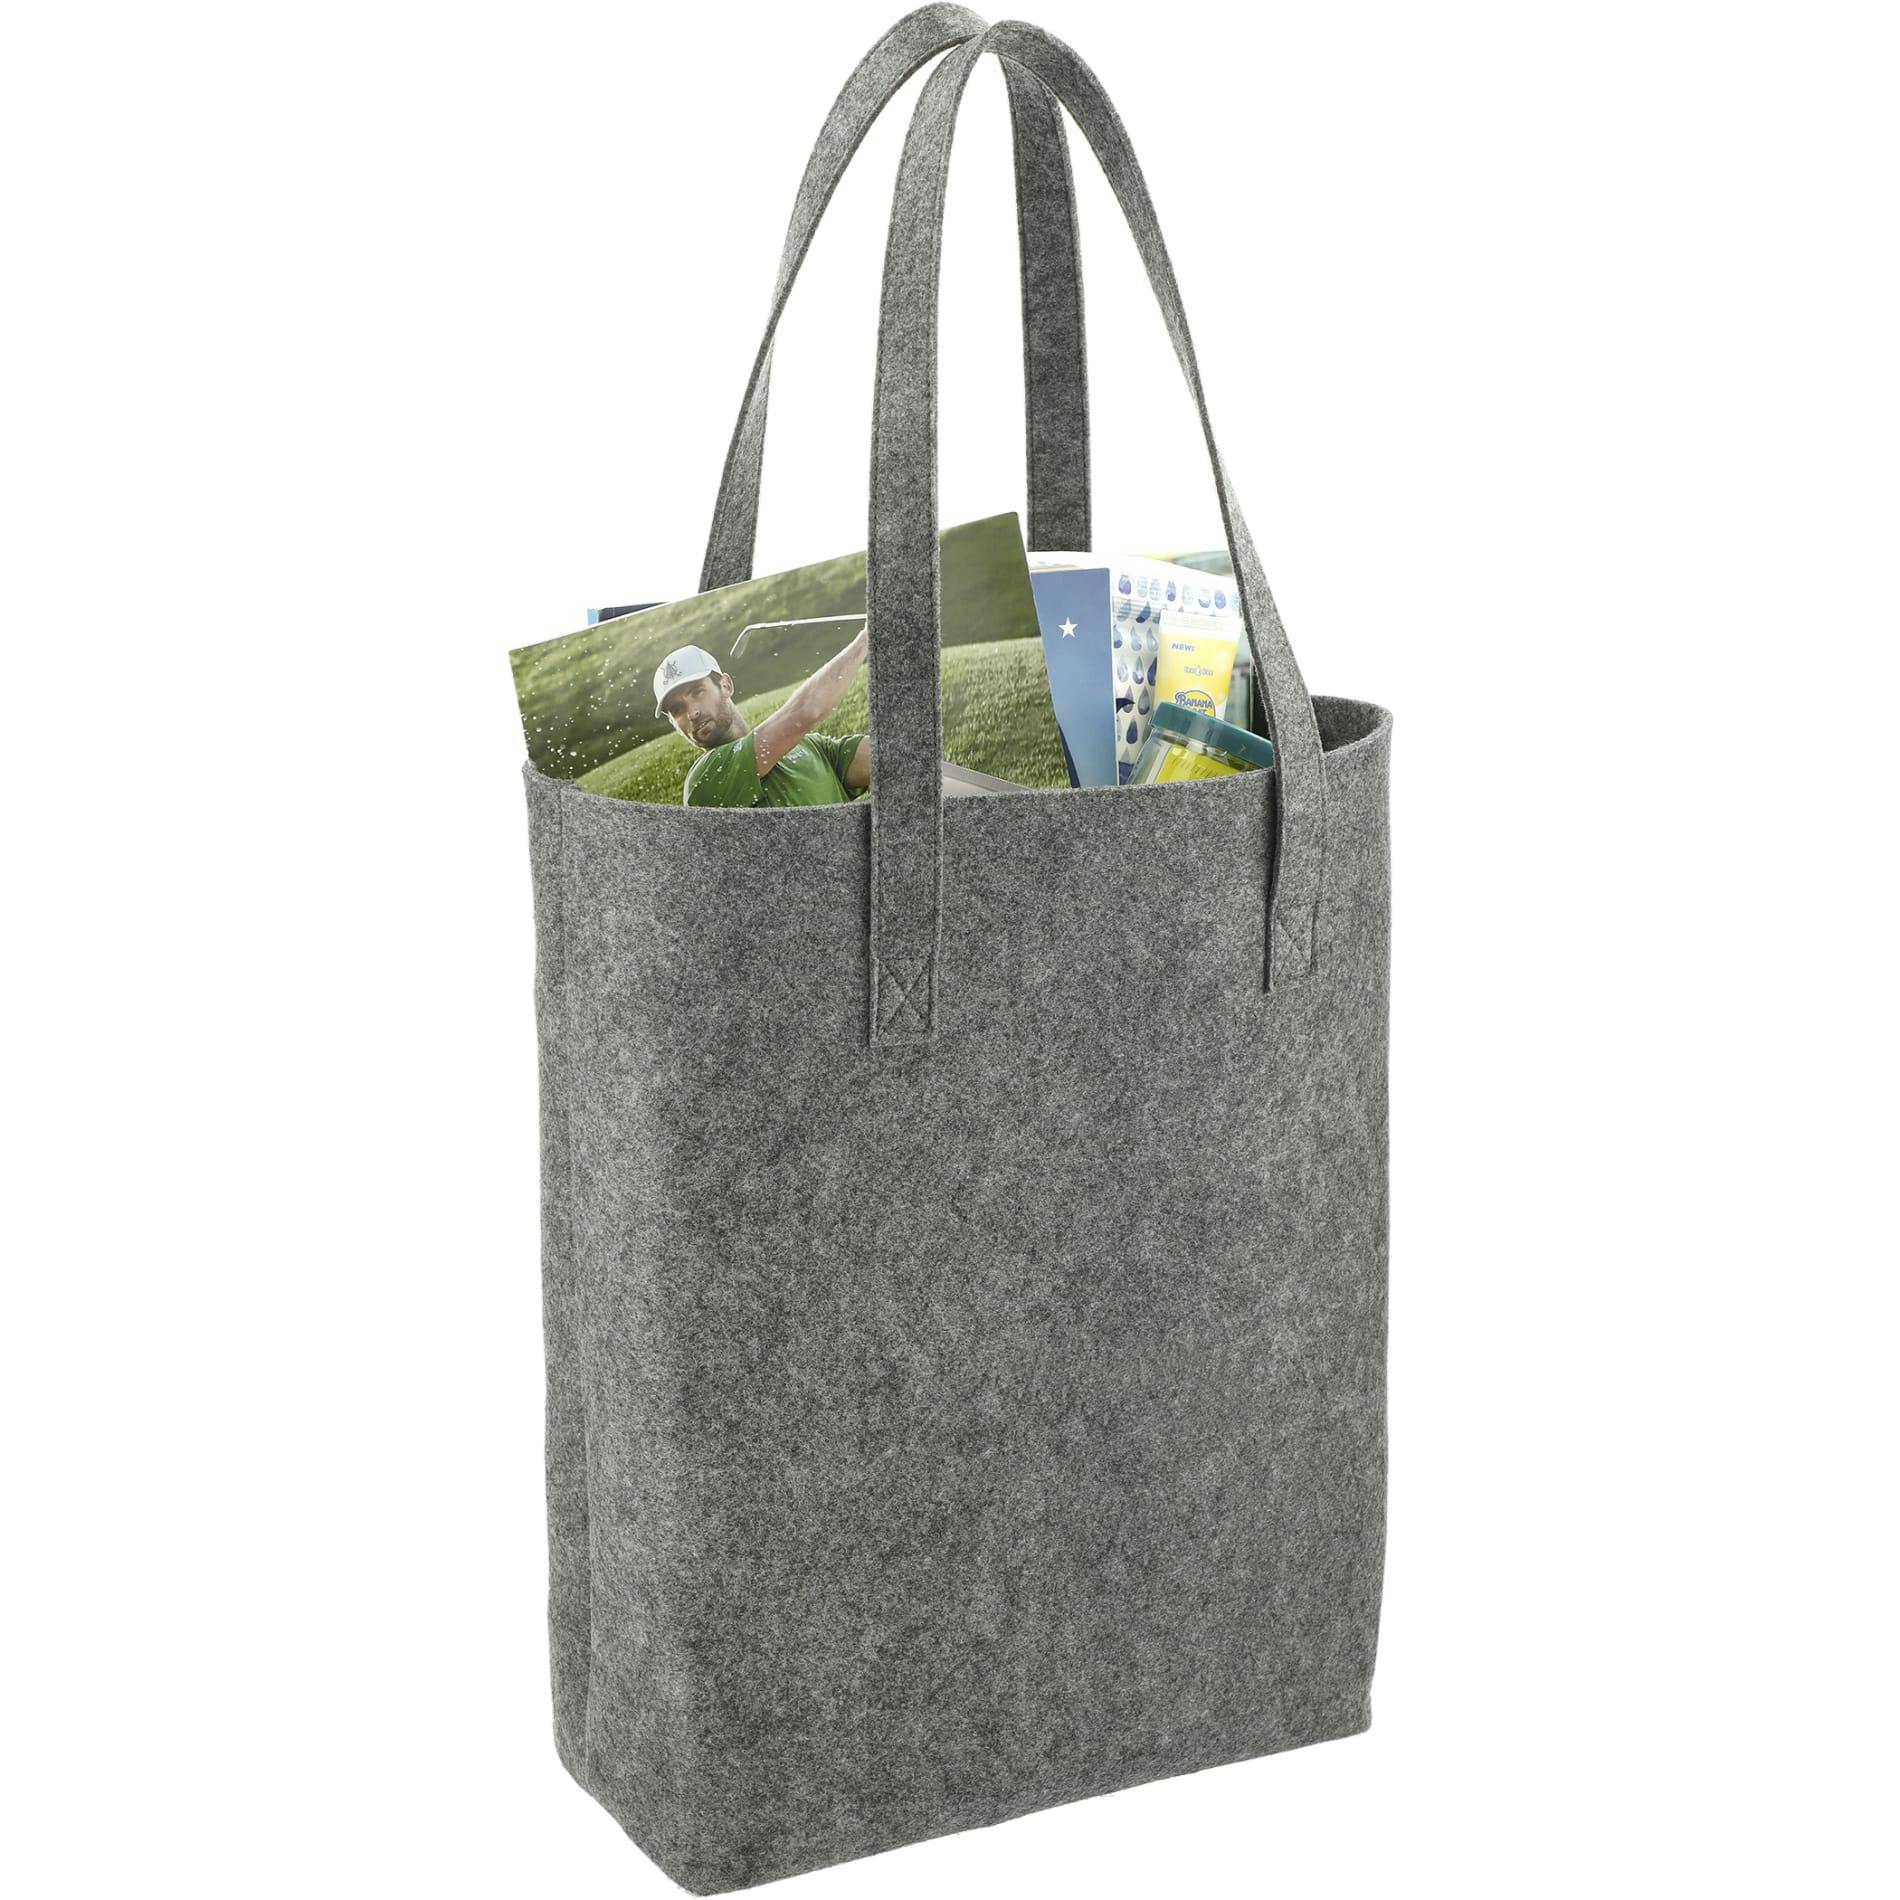 Recycled Felt Shopper Tote - additional Image 5